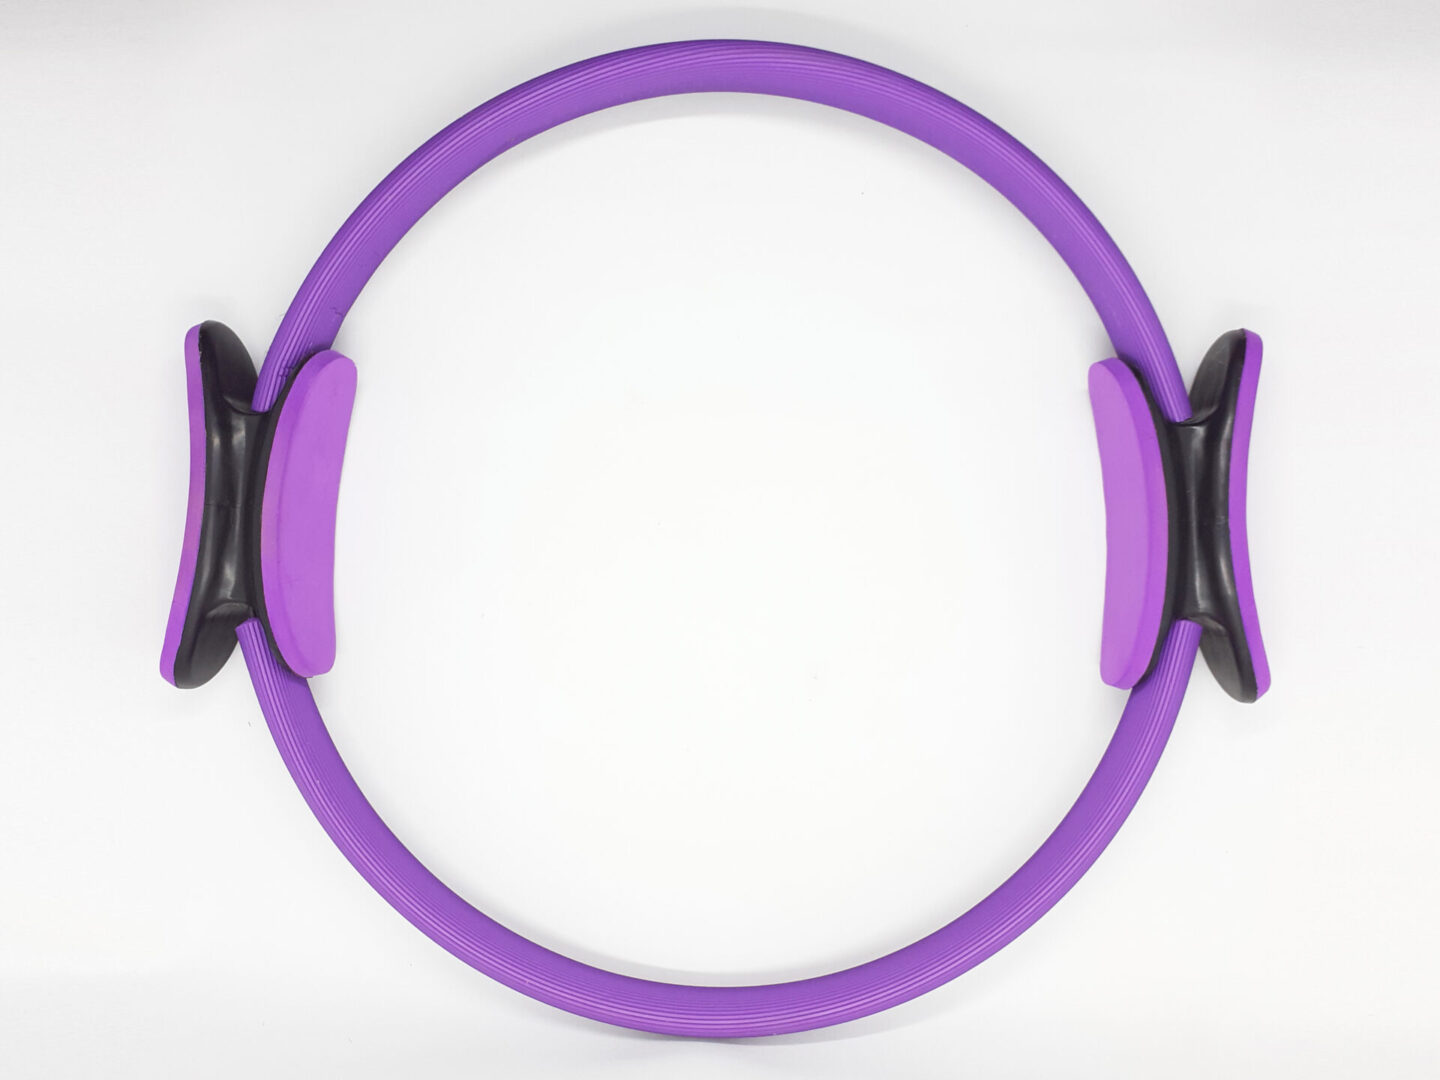 A purple and black ring is shown on the white background.